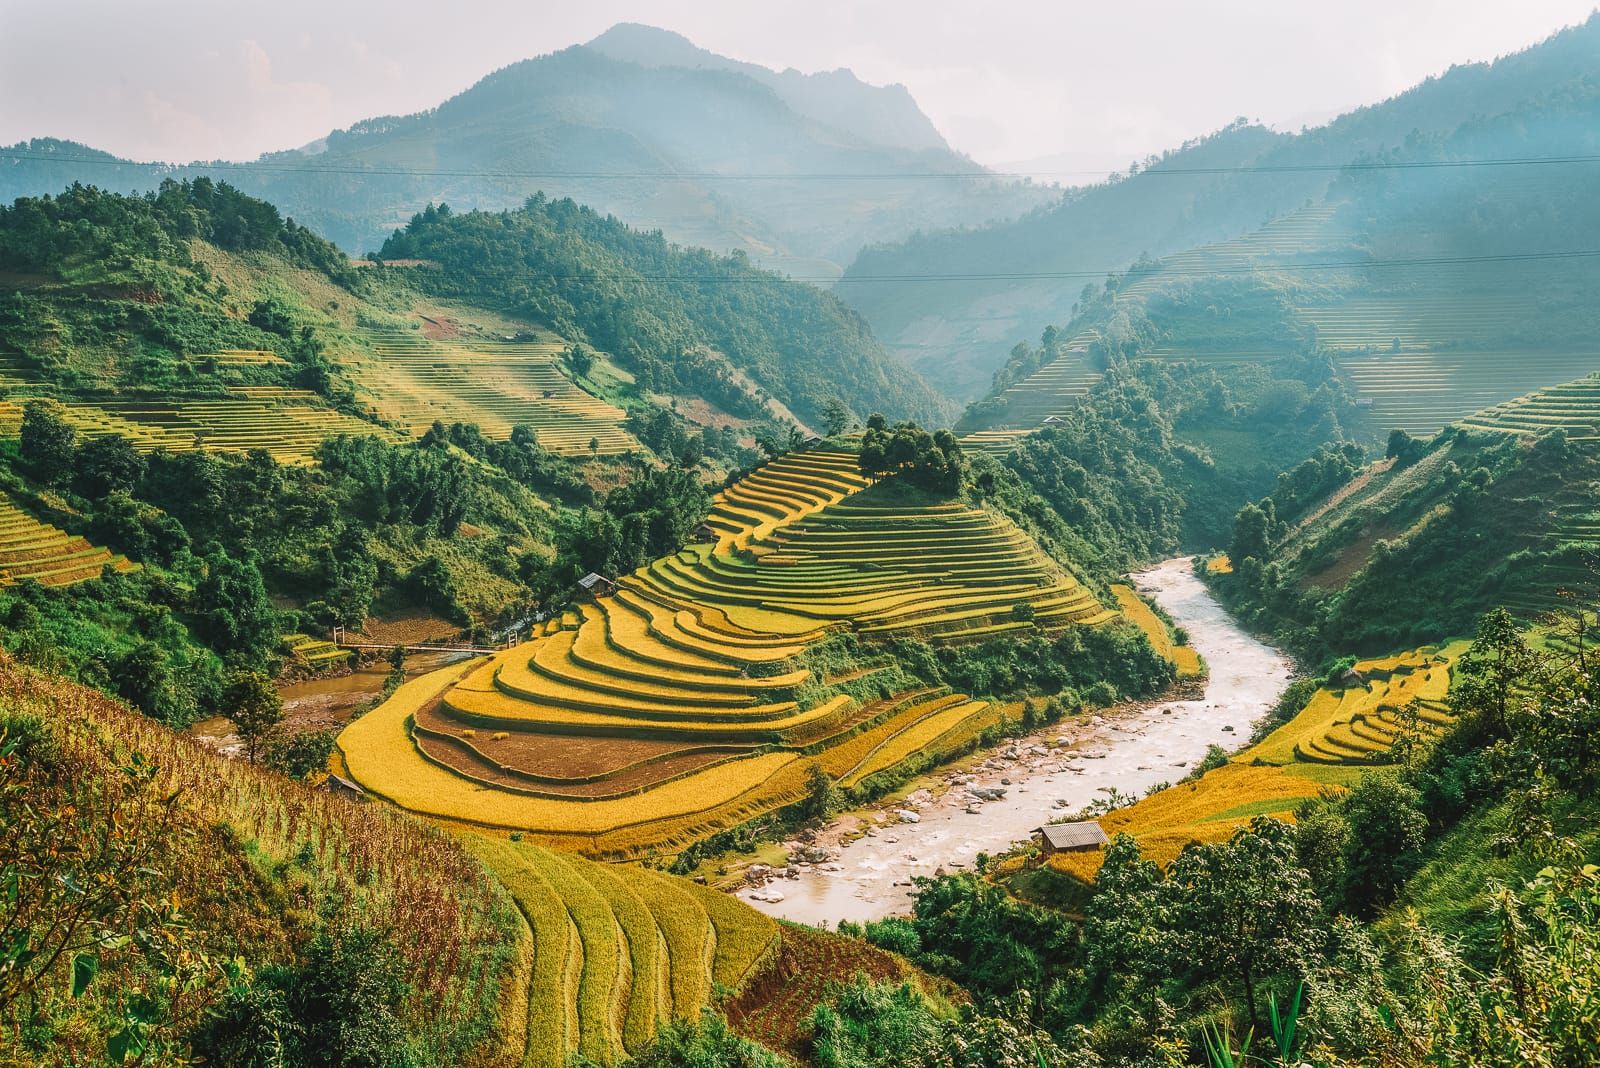 The terraced rice fields are dotted with green plants and trees